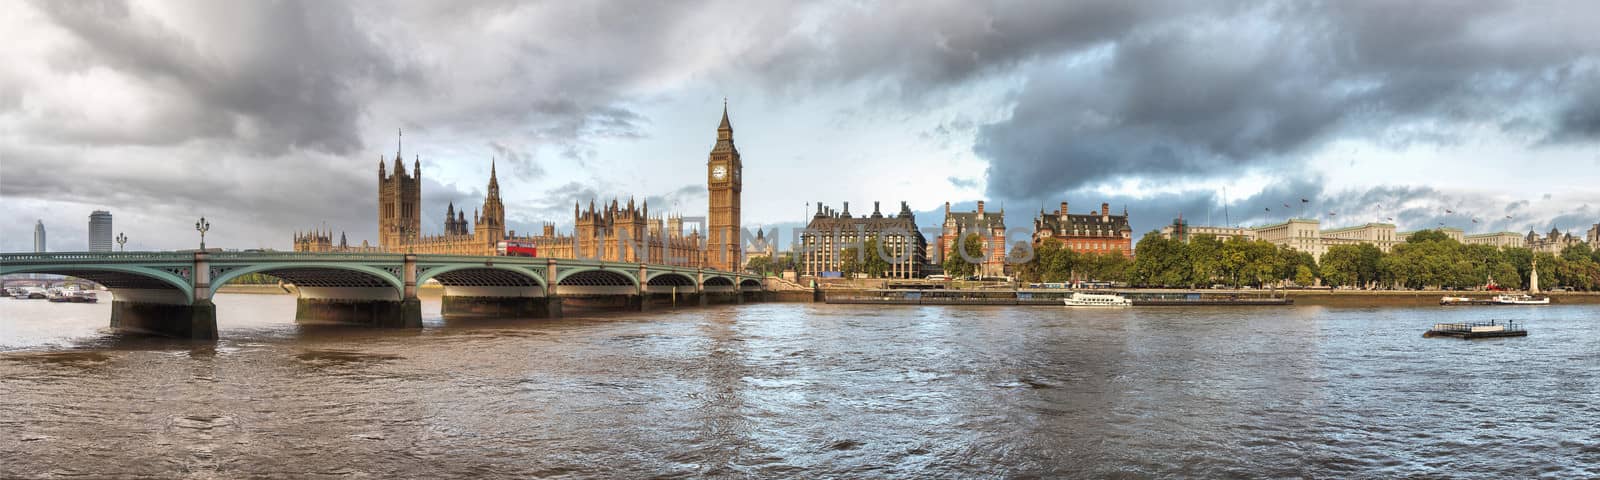 High Dynamic Range (HDR) panoramic view of the River Thames, Houses of Parliament and the Big Ben, Westminster Bridge in London